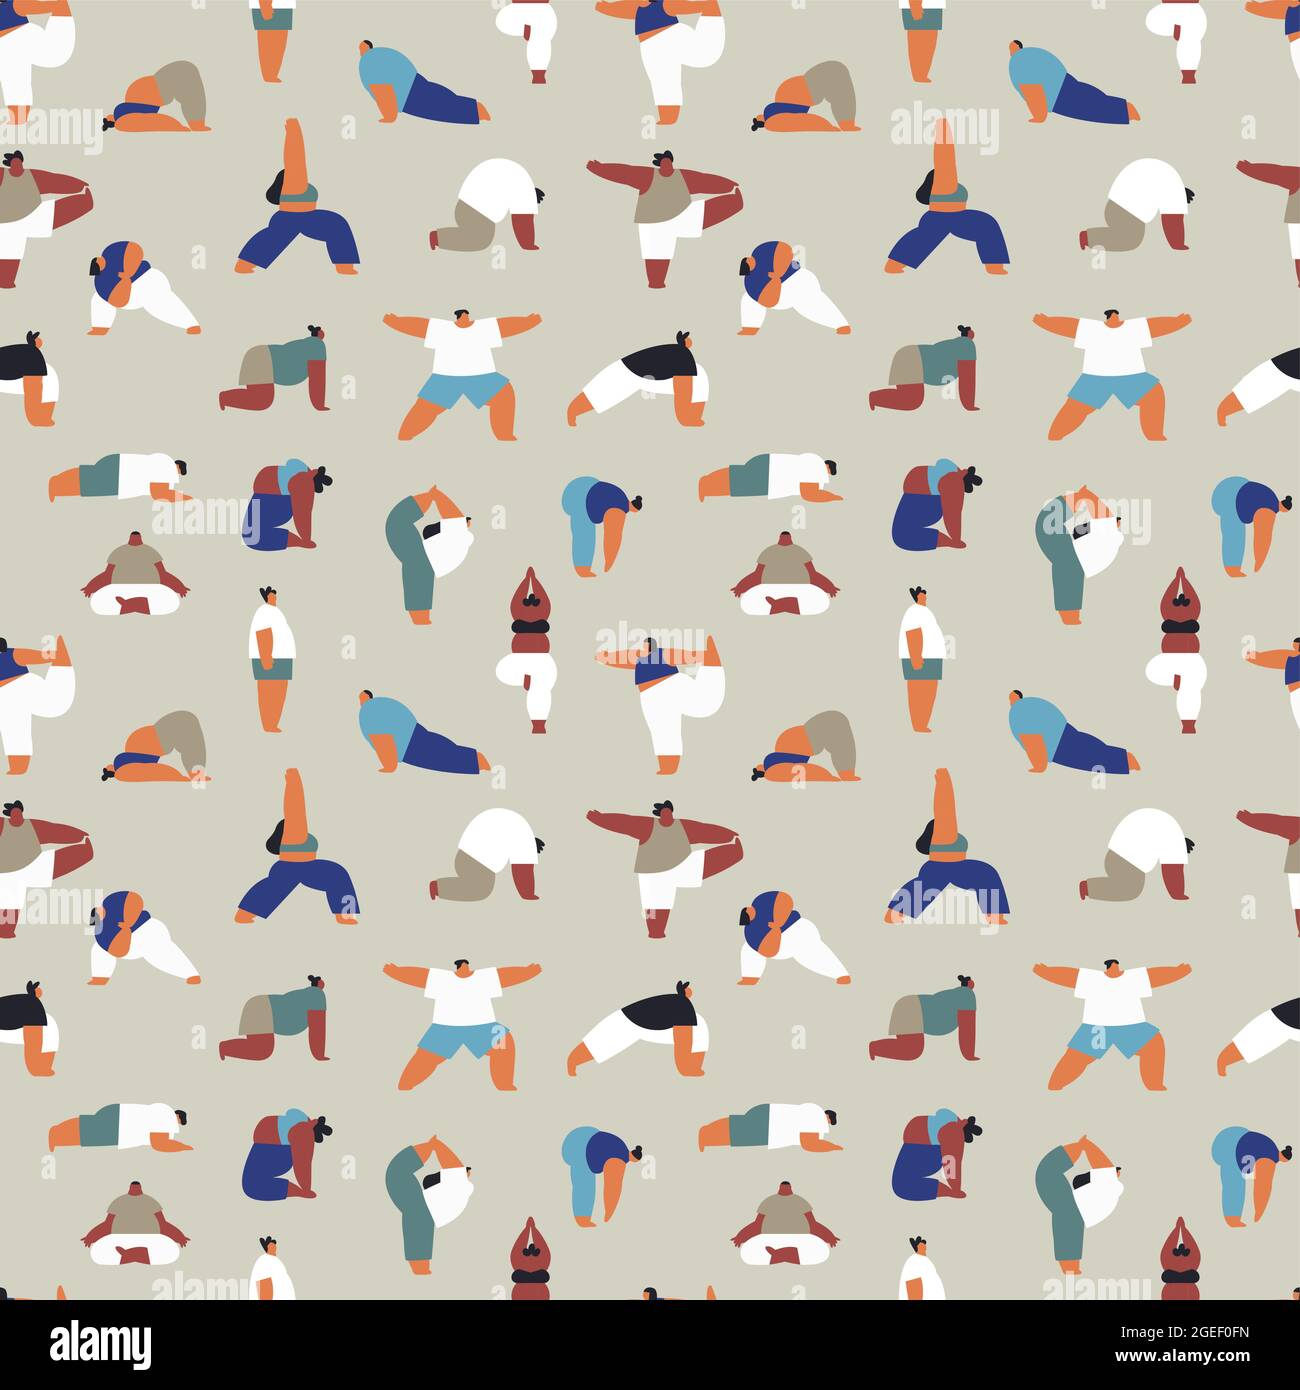 Seamless pattern illustration of diverse young people crowd doing different yoga exercise poses. Healthy lifestyle background with cartoon characters Stock Vector